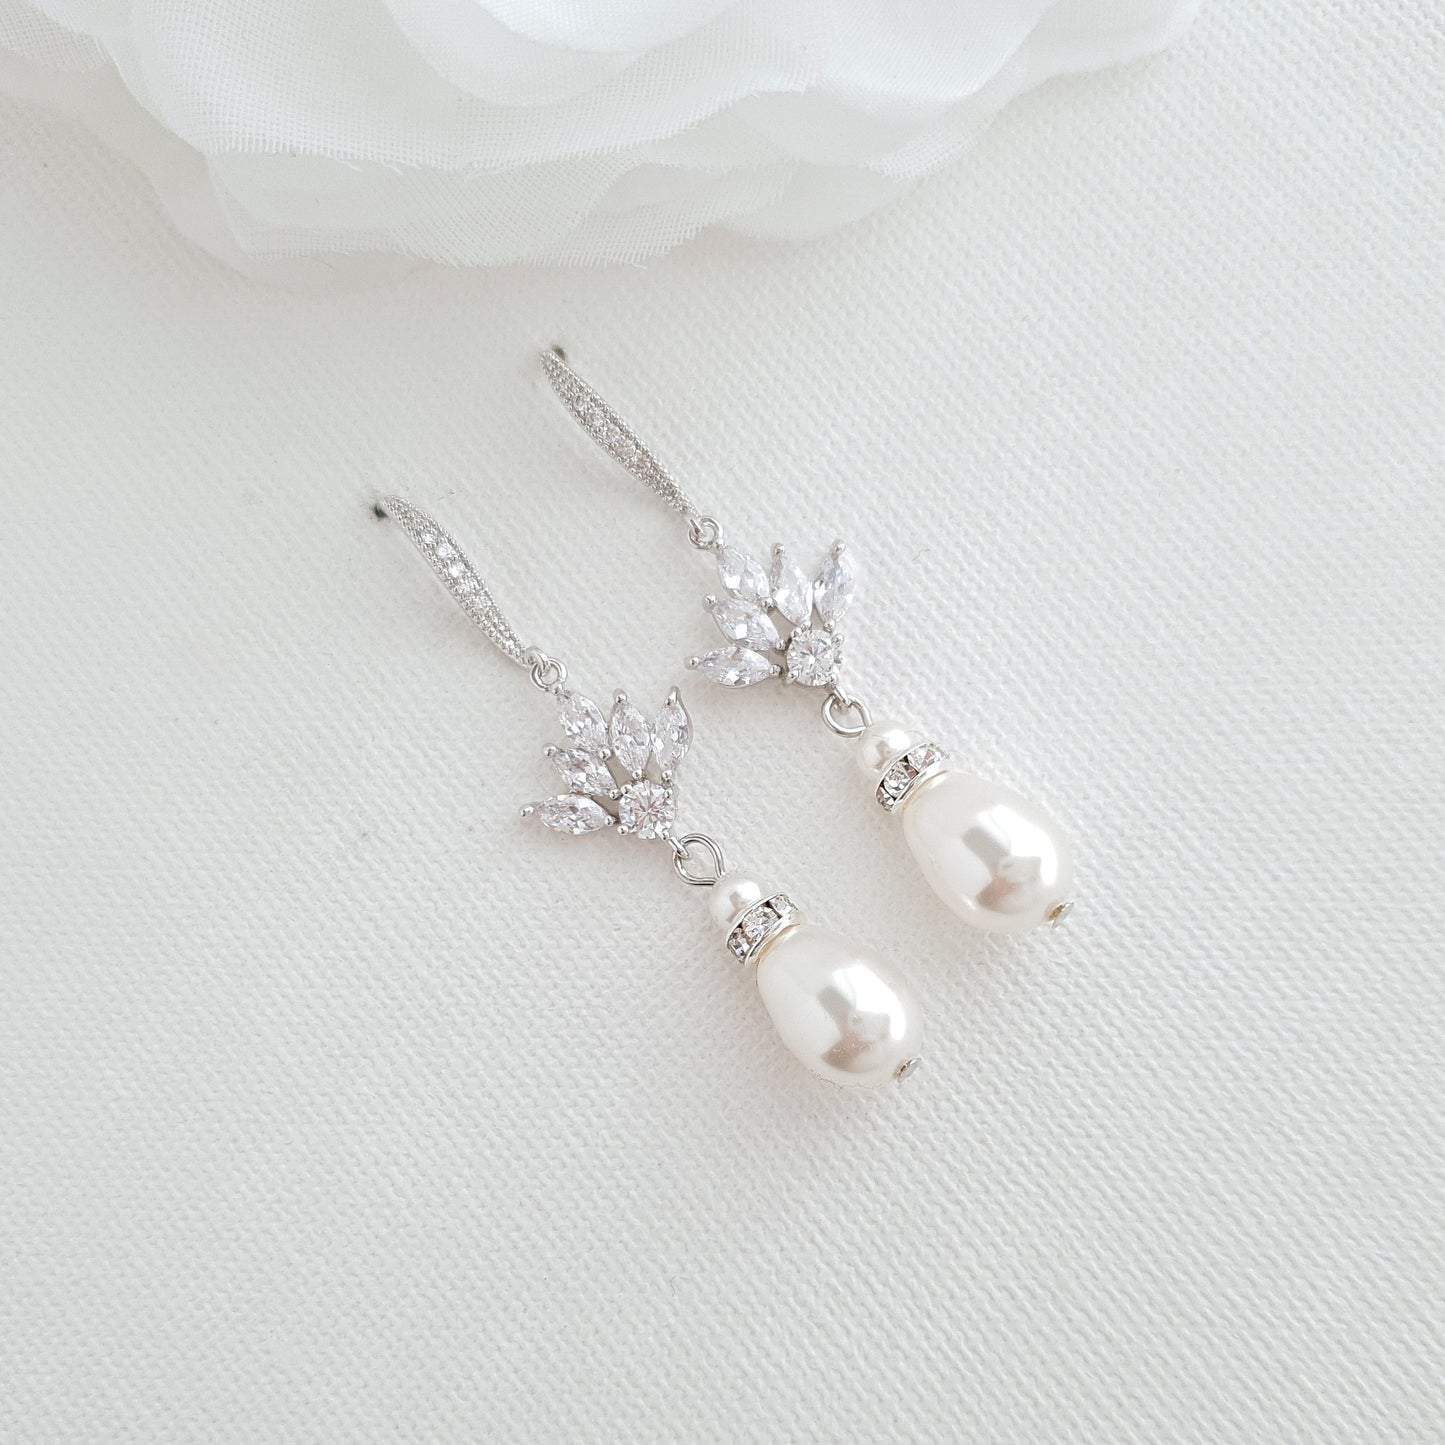 Bridal Dangle Earrings with Pearls & Crystals-Rosa